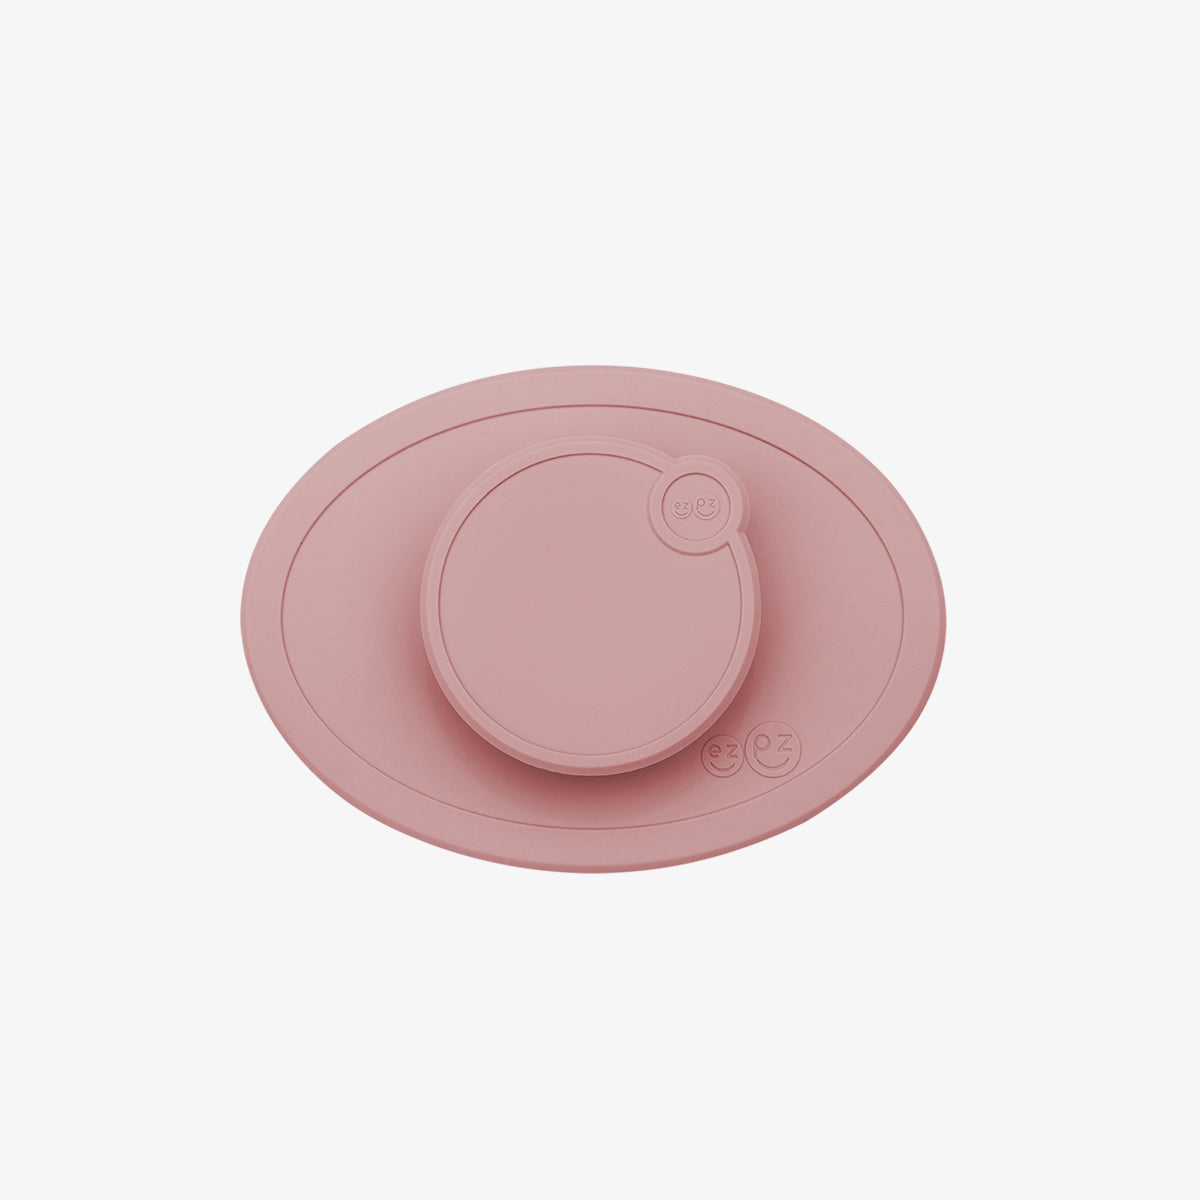 Tiny Bowl Lid in Blush / Storage Lids for the Tiny Bowl by ezpz / Silicone Lid for Baby Bowl